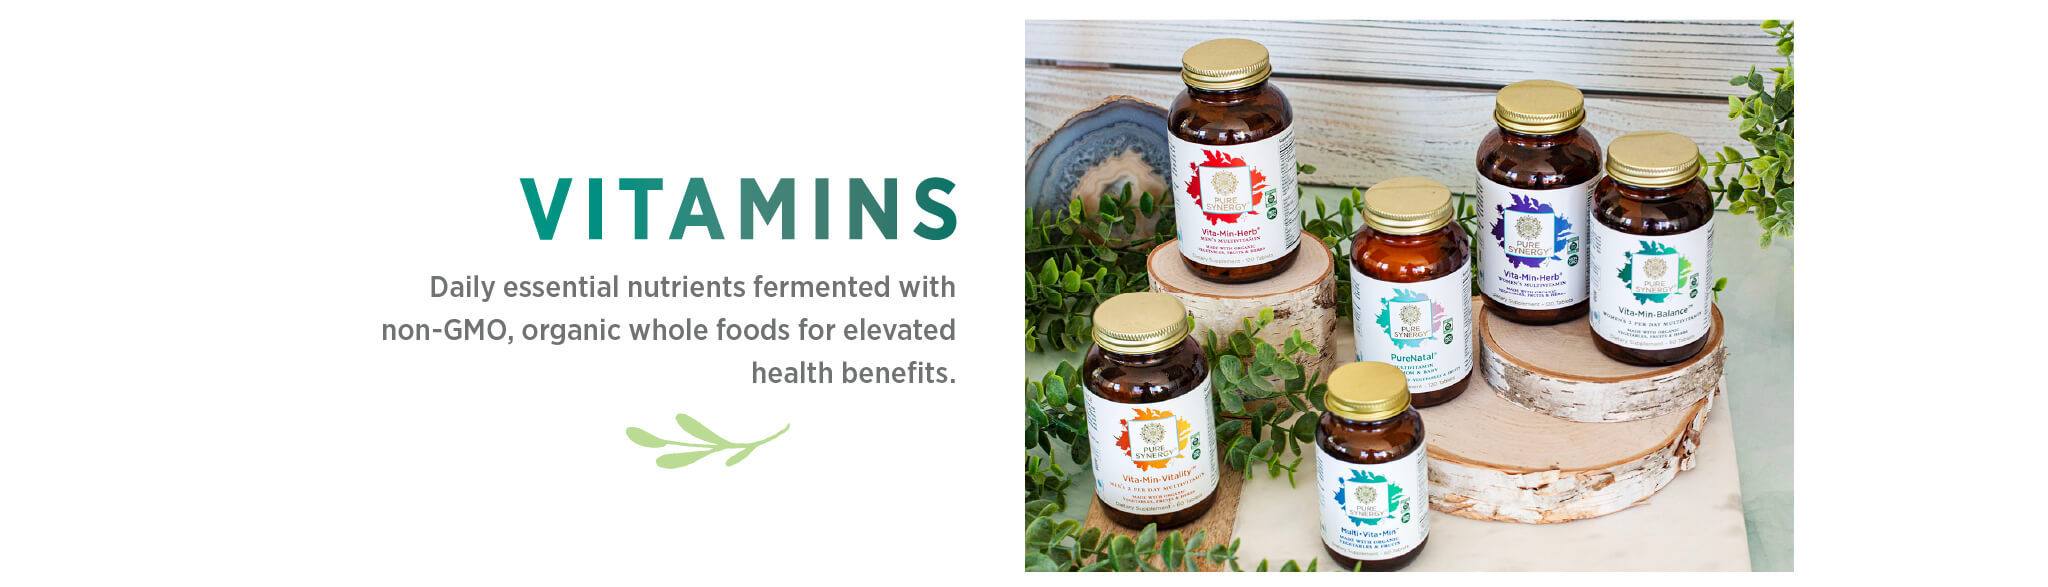 Vitamins: Daily essential nutrients fermented with non-GMO, organic whole foods for elevated health benefits.